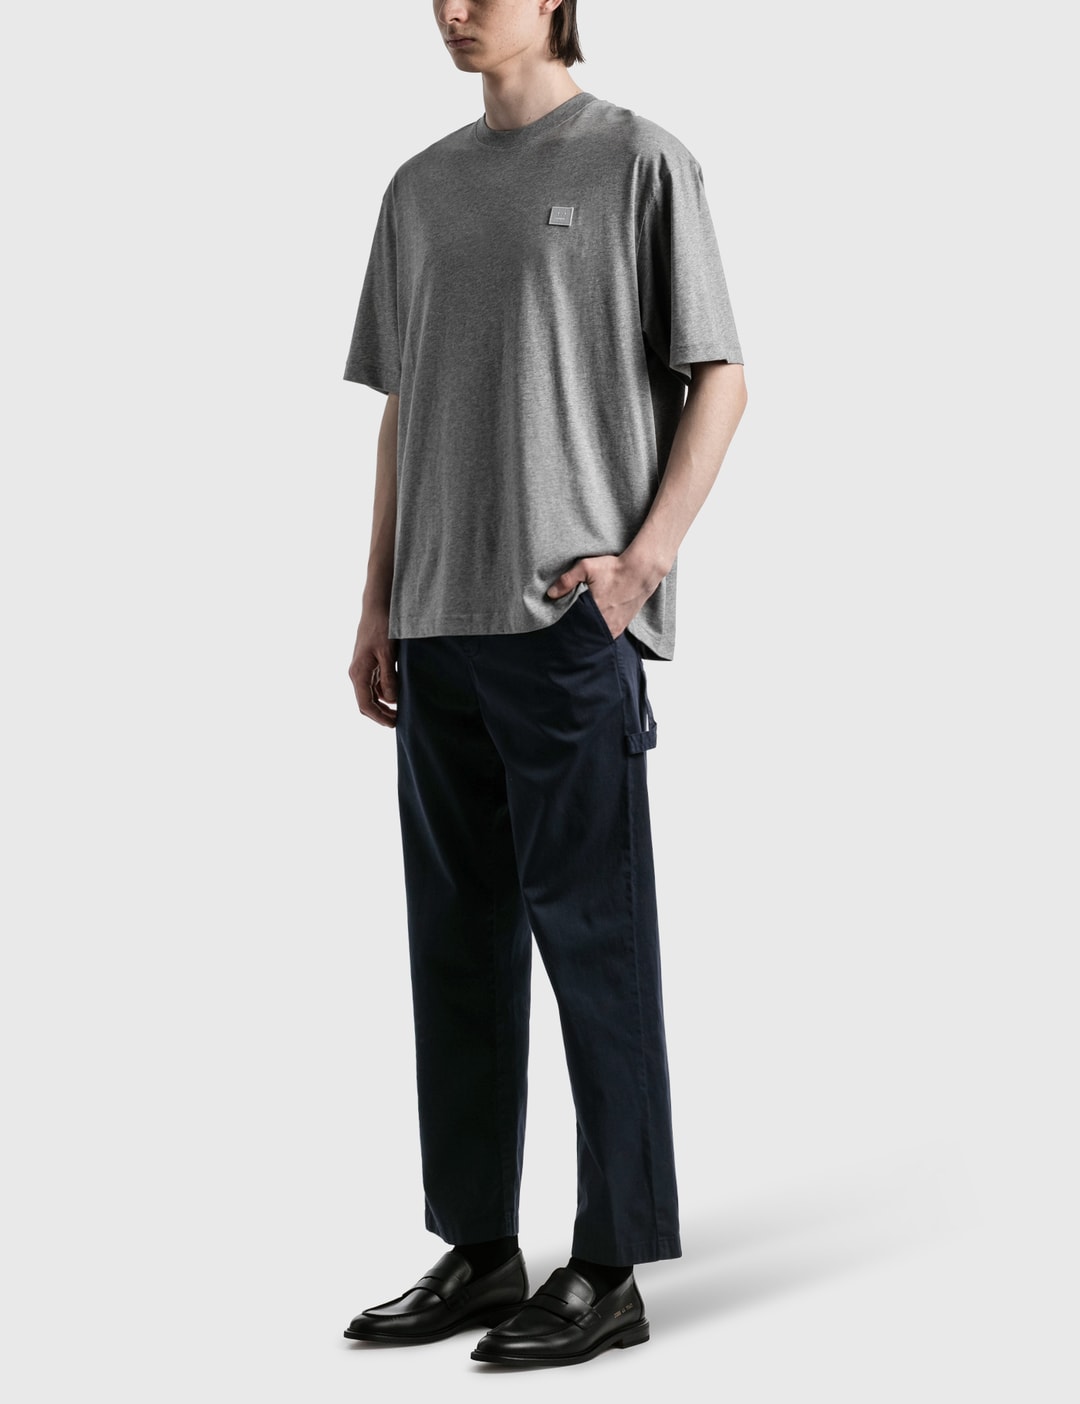 Acne Studios - Exford Face T-shirt | HBX - Globally Curated Fashion and ...